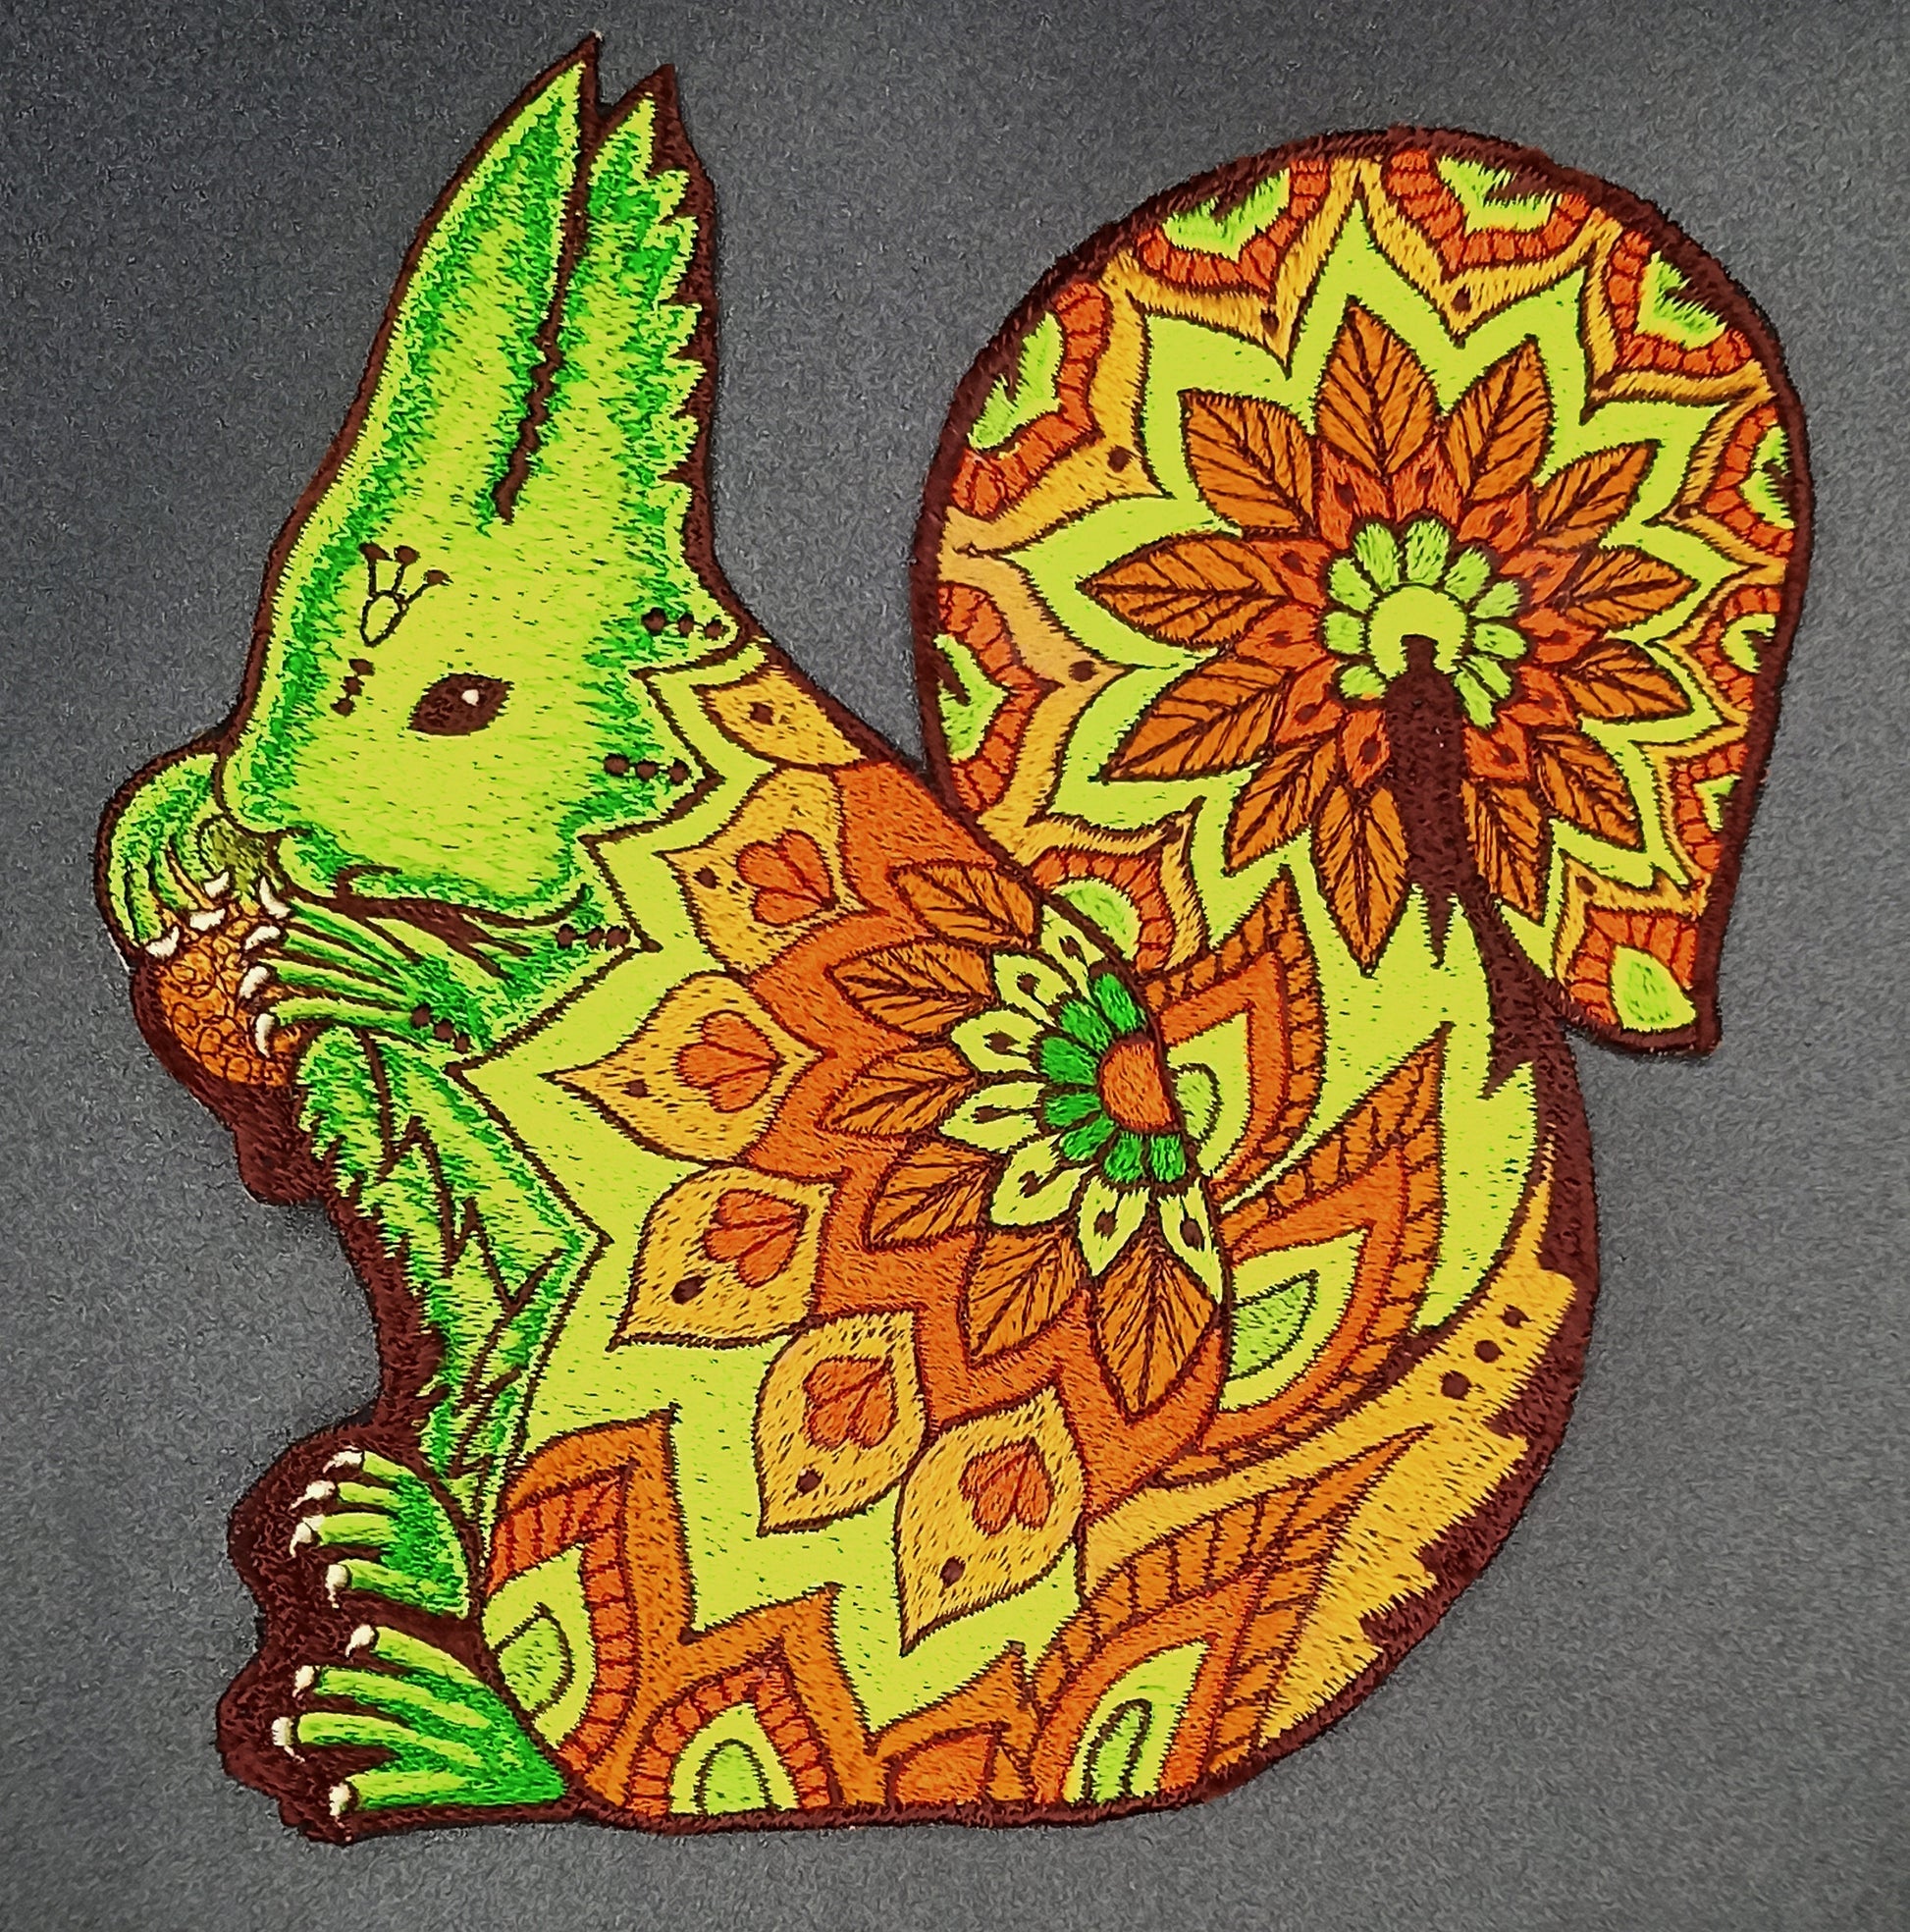 Psychedelic Squirrel UV Patch with blacklight glowing colors - Animal Embroidery neon shining beautiful and friendly spirit of the forest